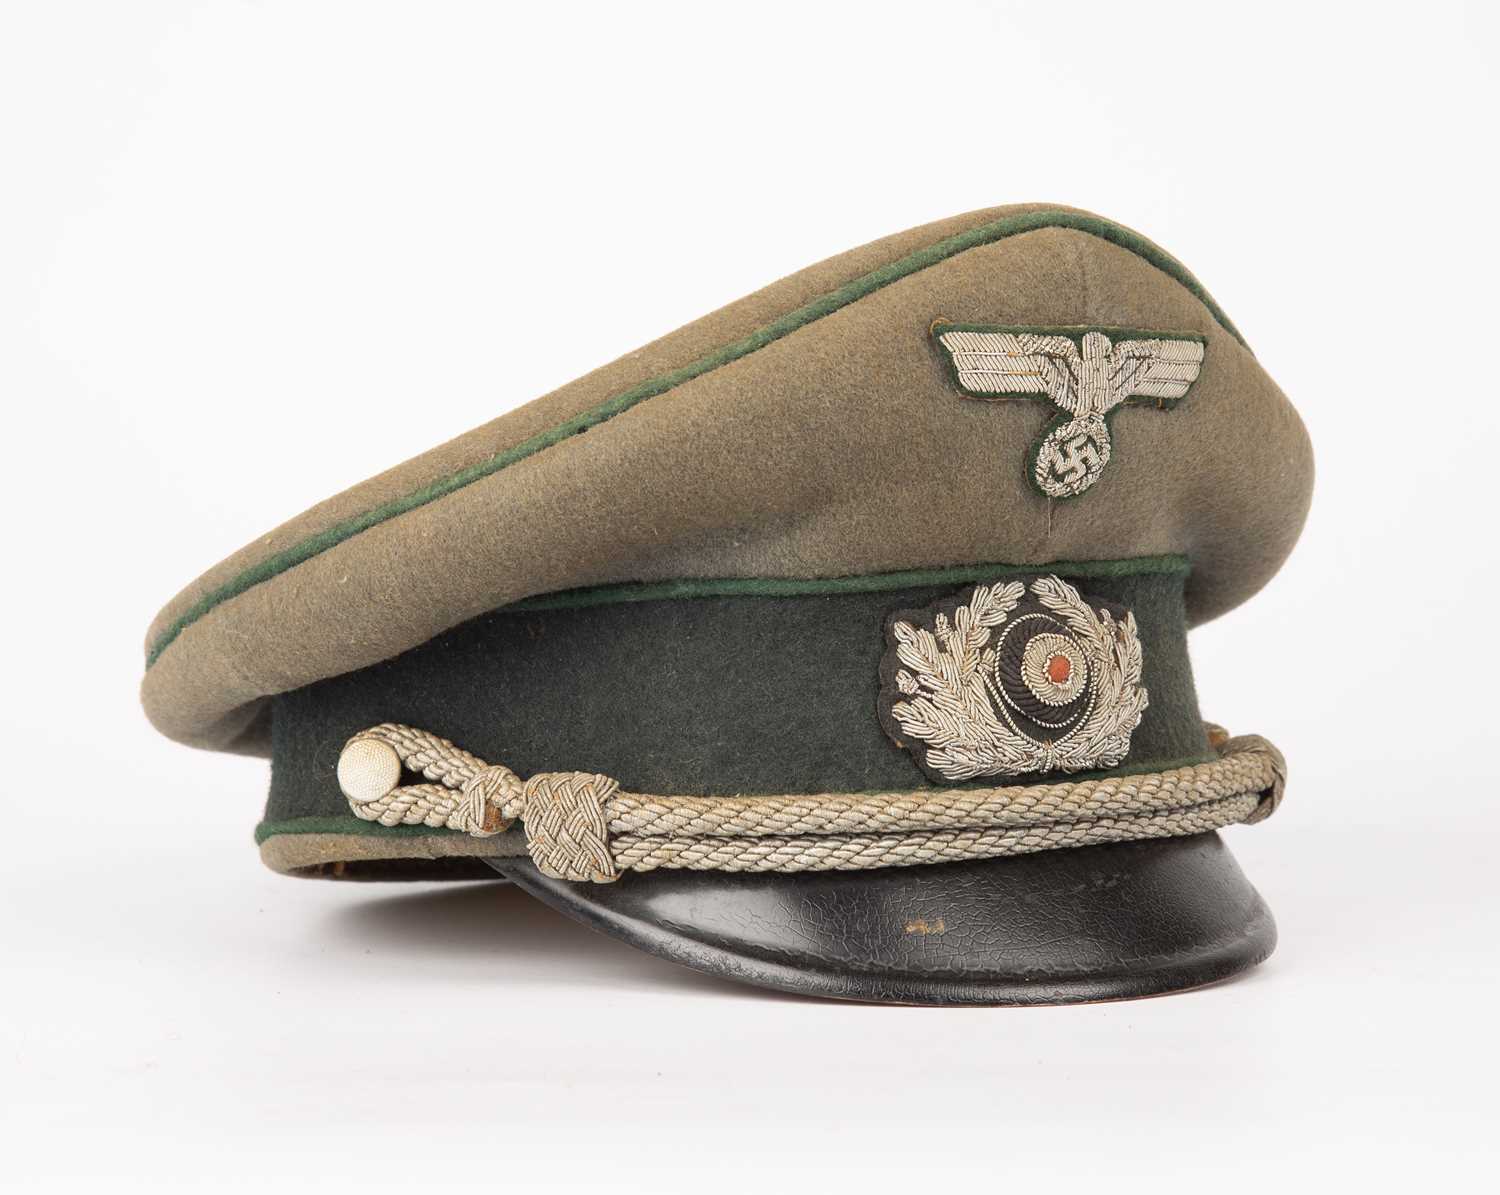 A German World War II infantry officers cap with green cloth and bullion badgesFelt with some